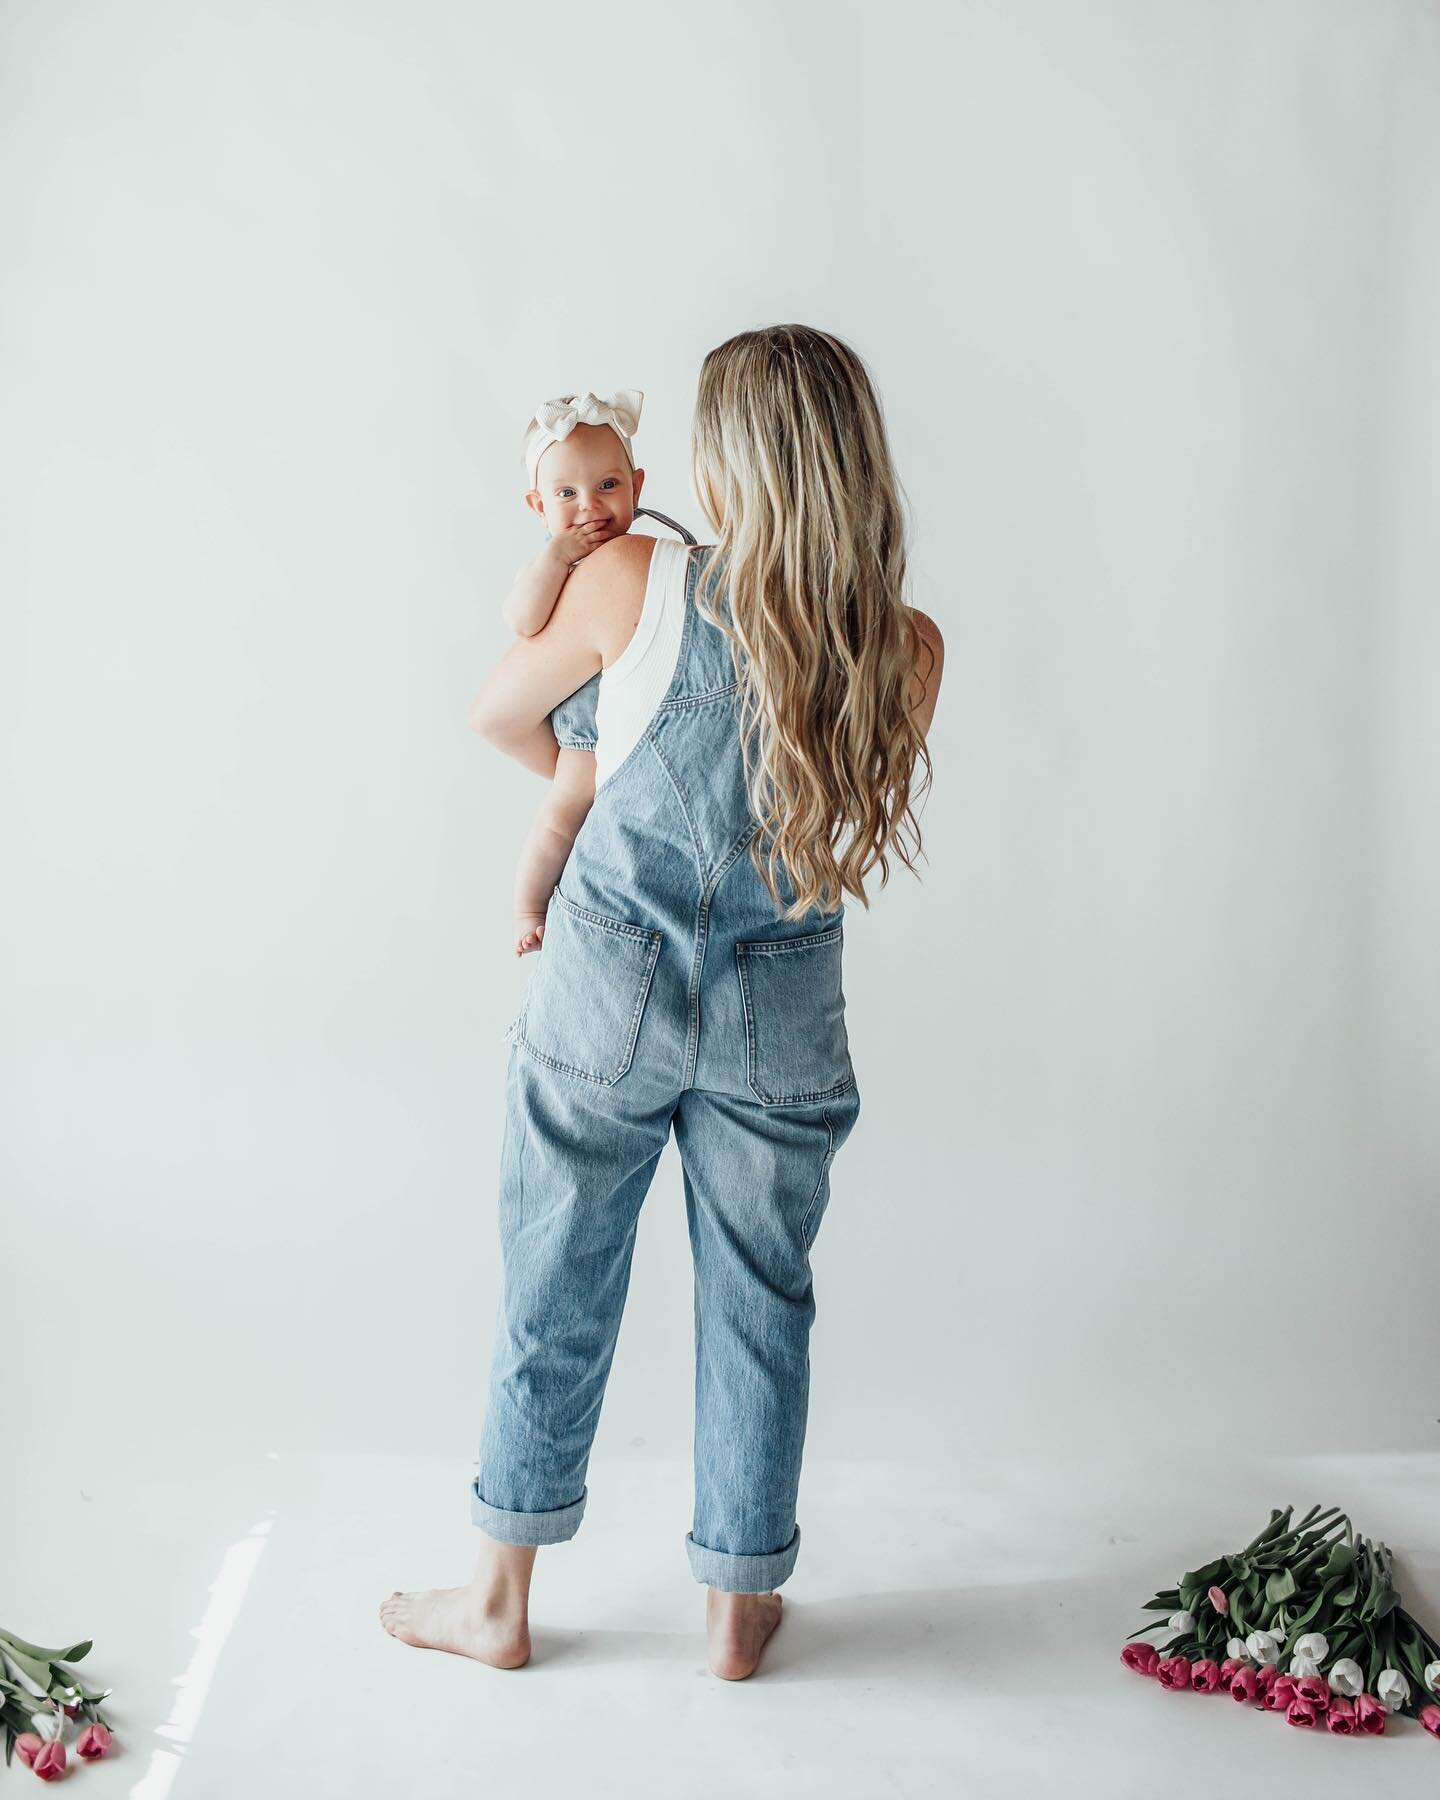 Blue Jean baby 🩵 (and mama) 😚

Wishing all my mamas a happy Mother&rsquo;s Day weekend! You&rsquo;re truly amazing. 

&amp; sending love to all those who are trying or wanting to become mamas. You&rsquo;re truly amazing, too🤍